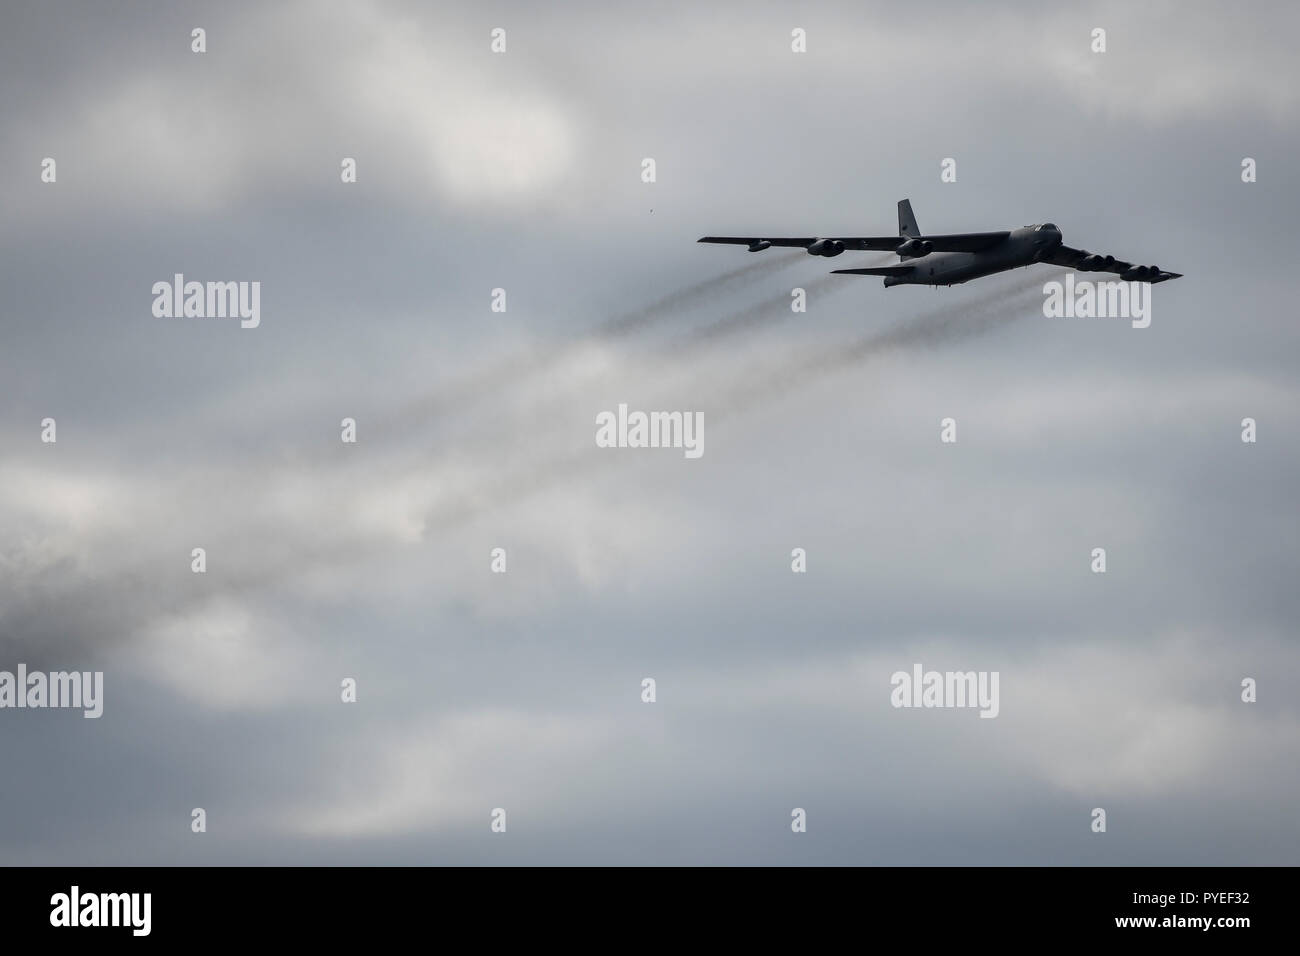 A B-52 Stratofortress, assigned to 2nd Bomb Wing, Barksdale Air Force Base, Louisiana, participates in an aerial demonstration at Hurlburt Field, Florida, Oct. 26, 2018. During the event, 12 aircraft from across the Air Force participated in an aerial demonstration in honor of Master Sgt. John Chapman, a combat controller who made the ultimate sacrifice during an intense battle in the mountains of Afghanistan. Chapman was posthumously awarded the Medal of Honor on Aug. 22, 2018. (U.S. Air Force photo by Senior Airman Dennis Spain) Stock Photo